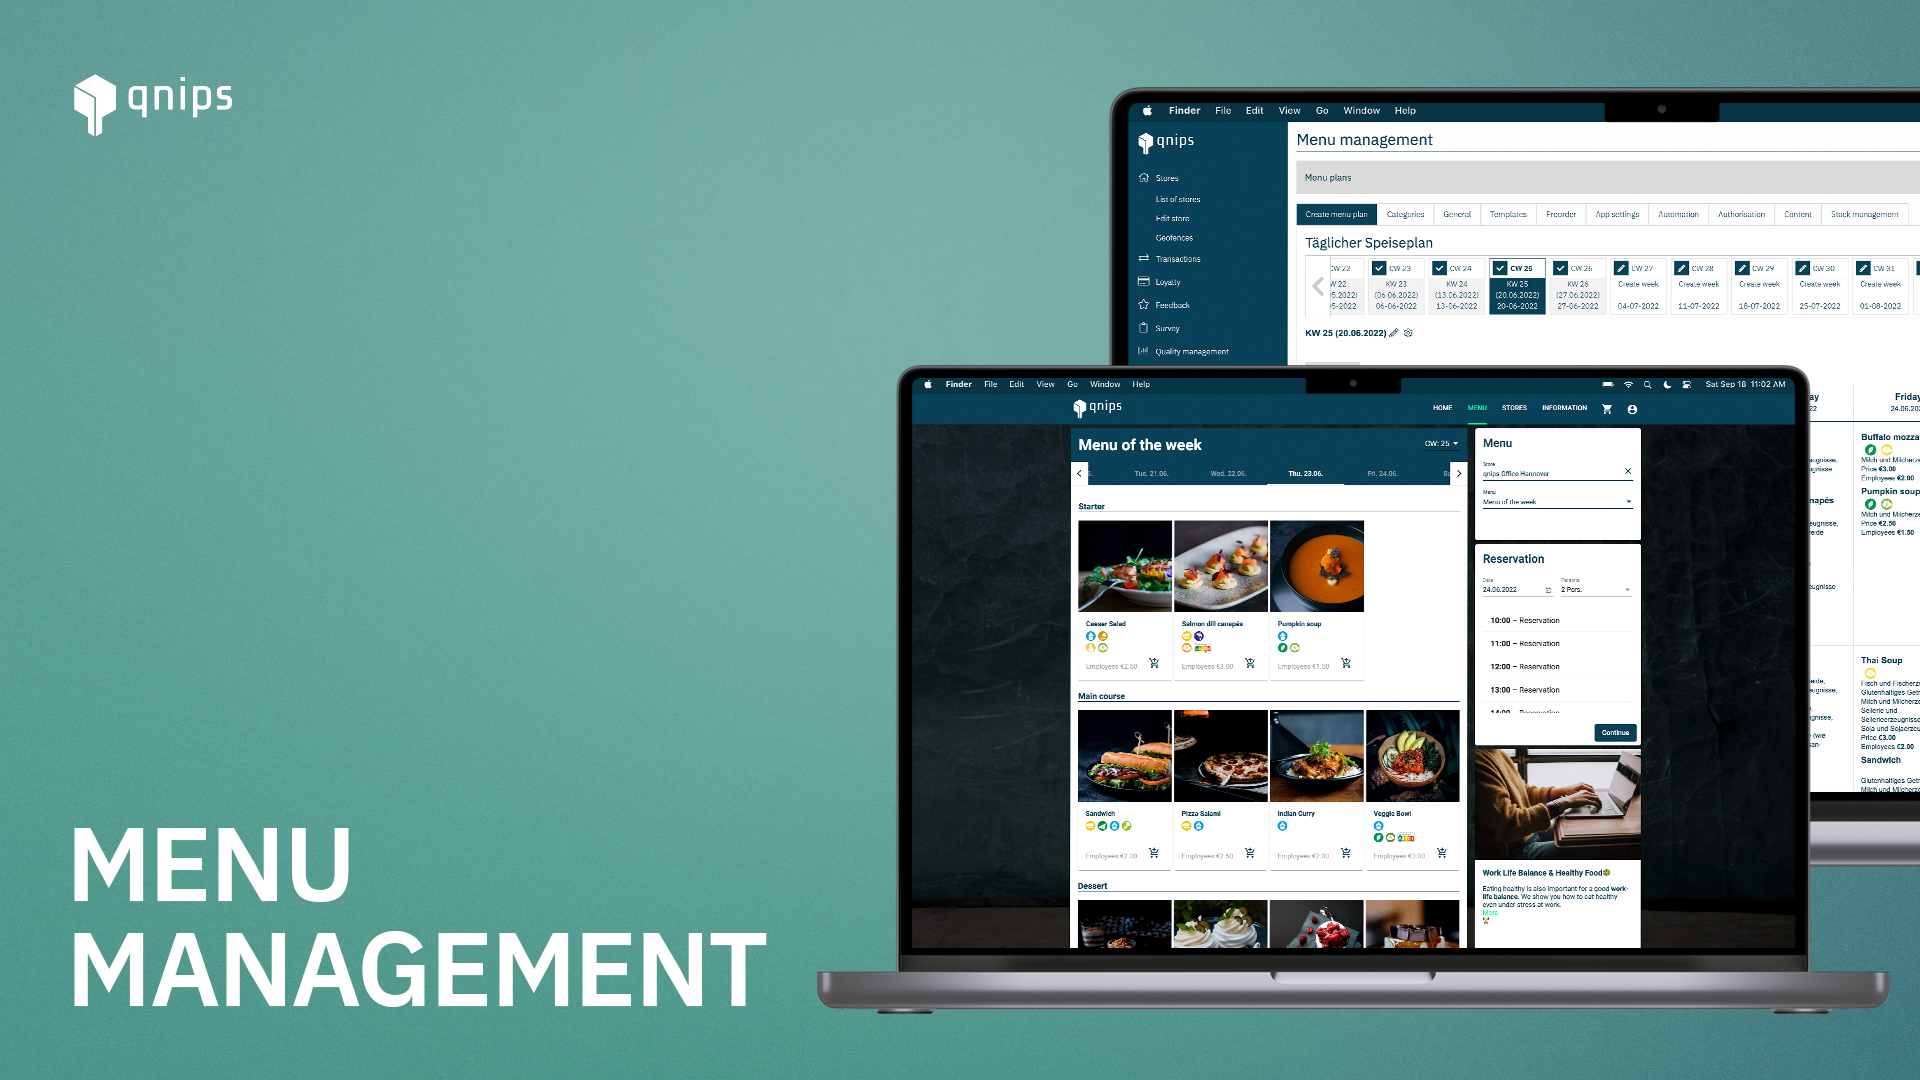 Easy management of menus assortment and marketing content.